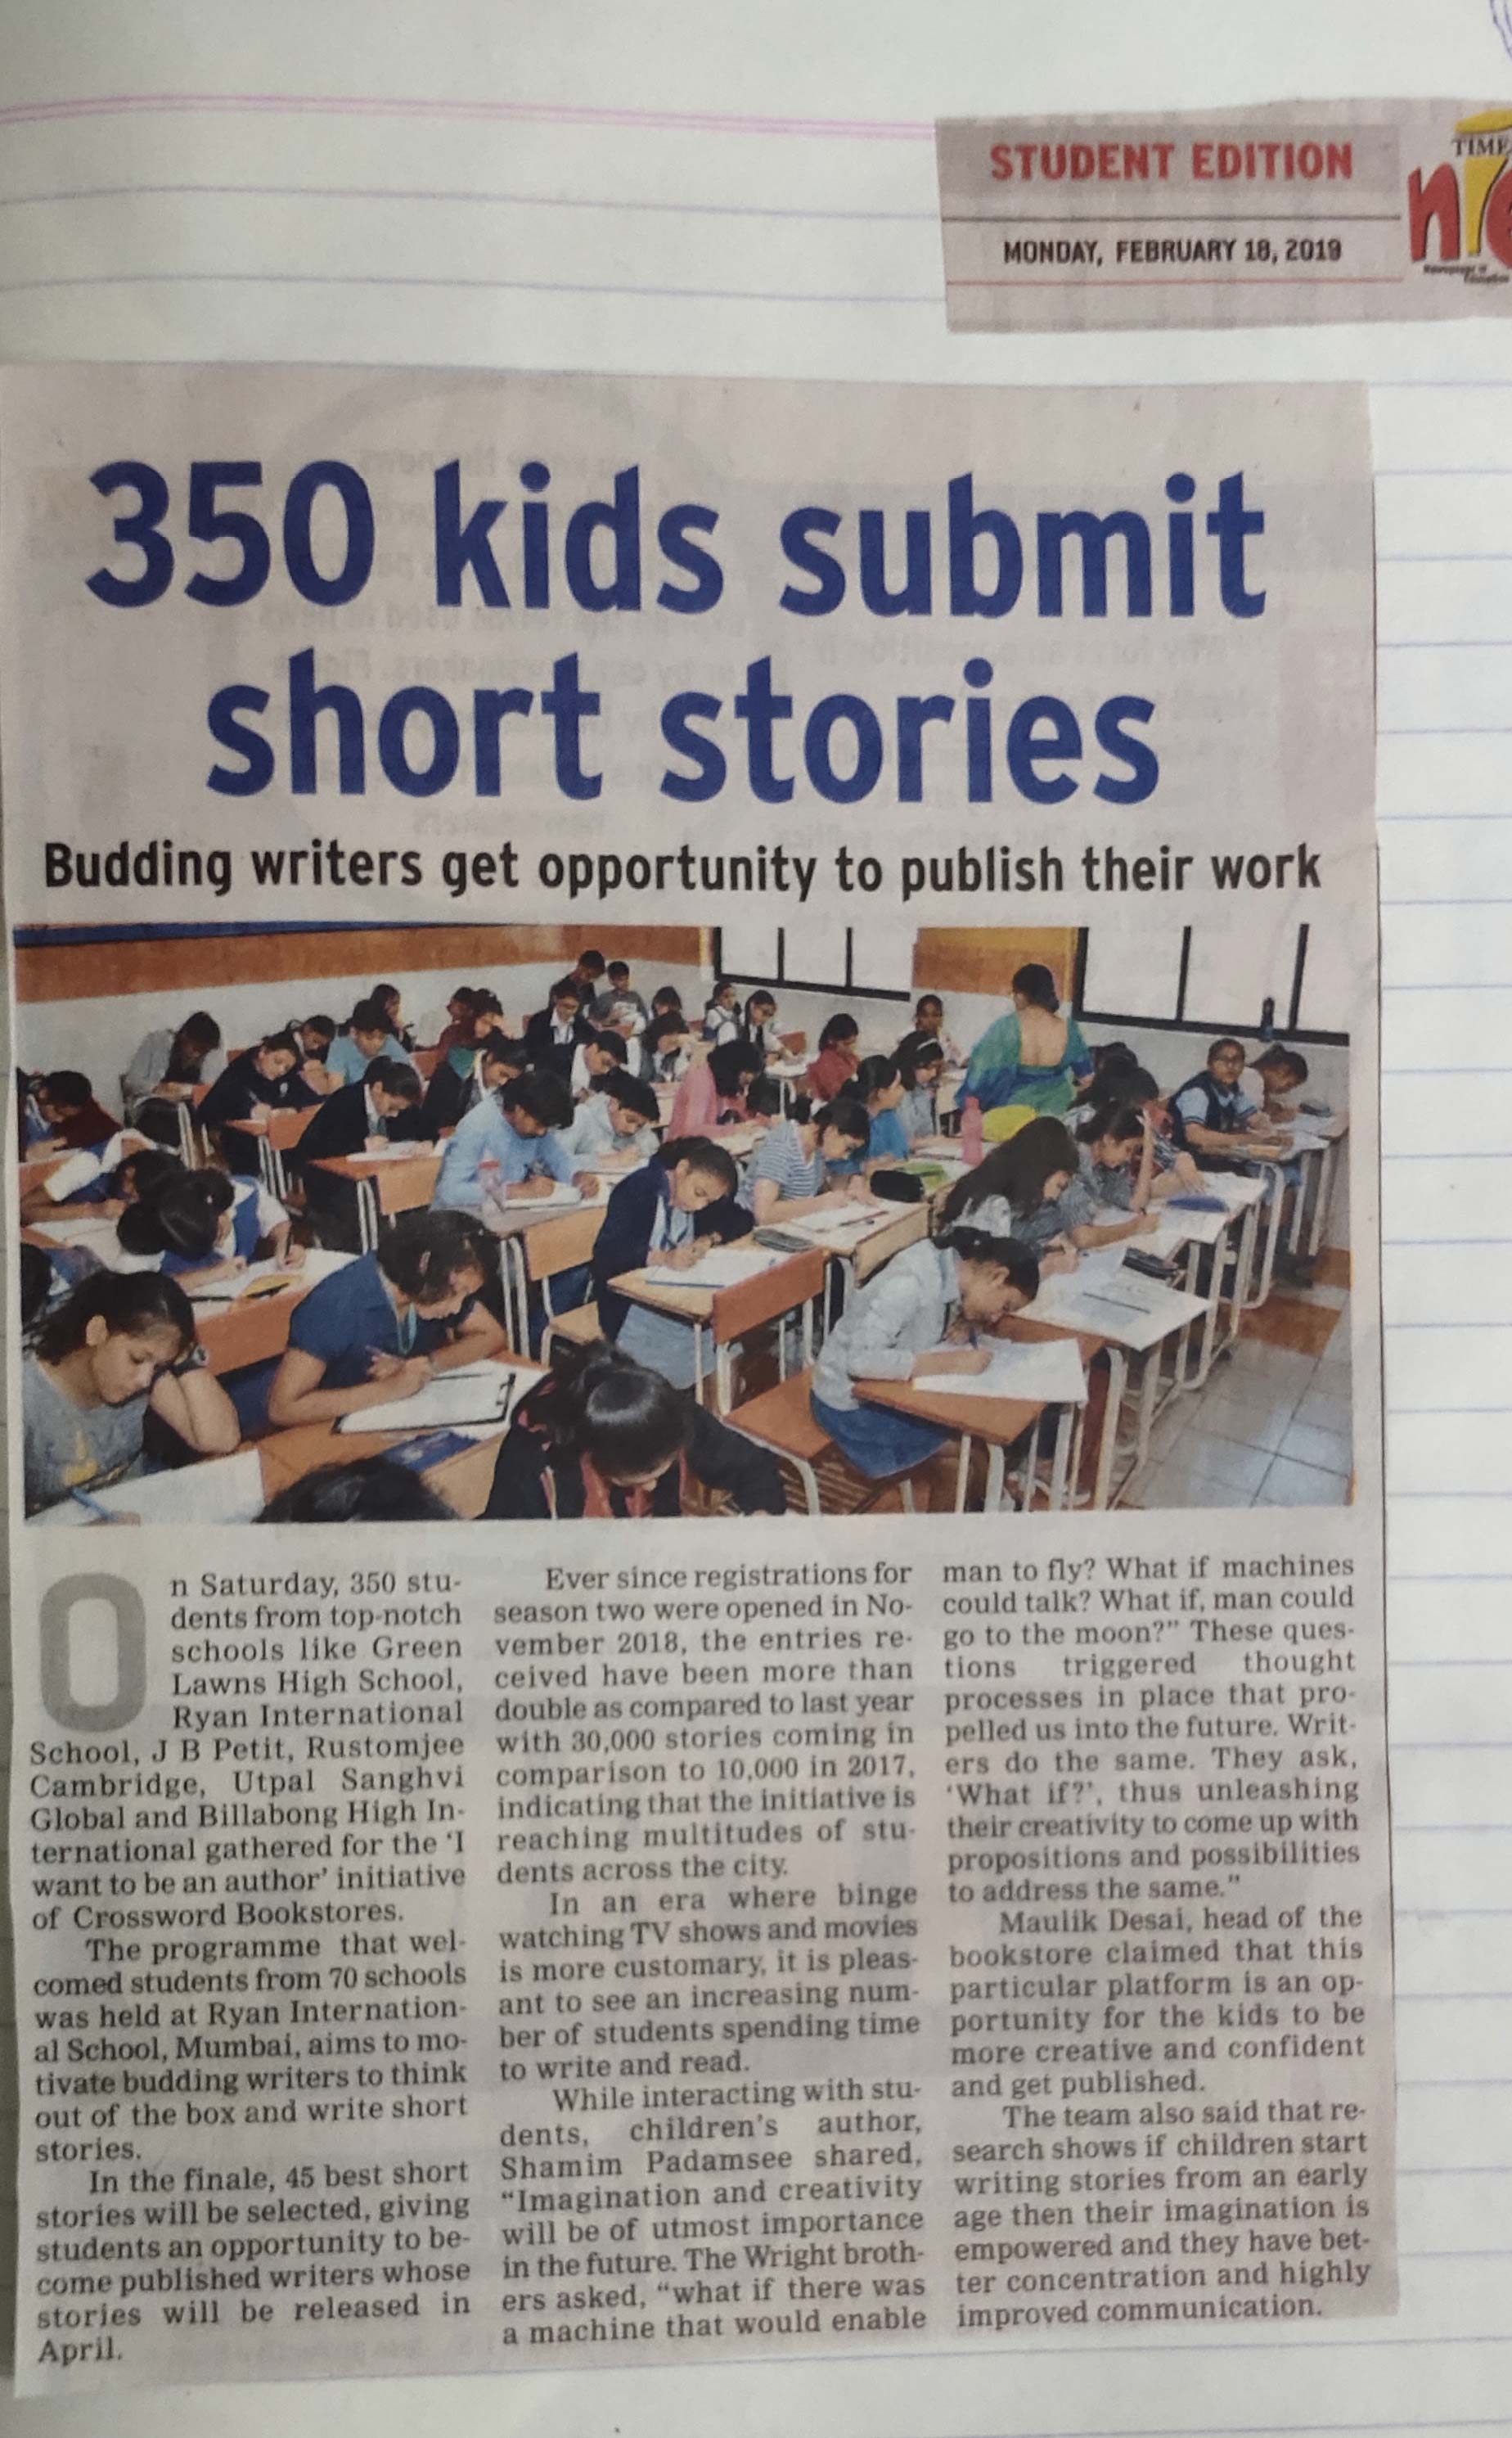 An article under the name “I want to be an author” was published in the Times of India